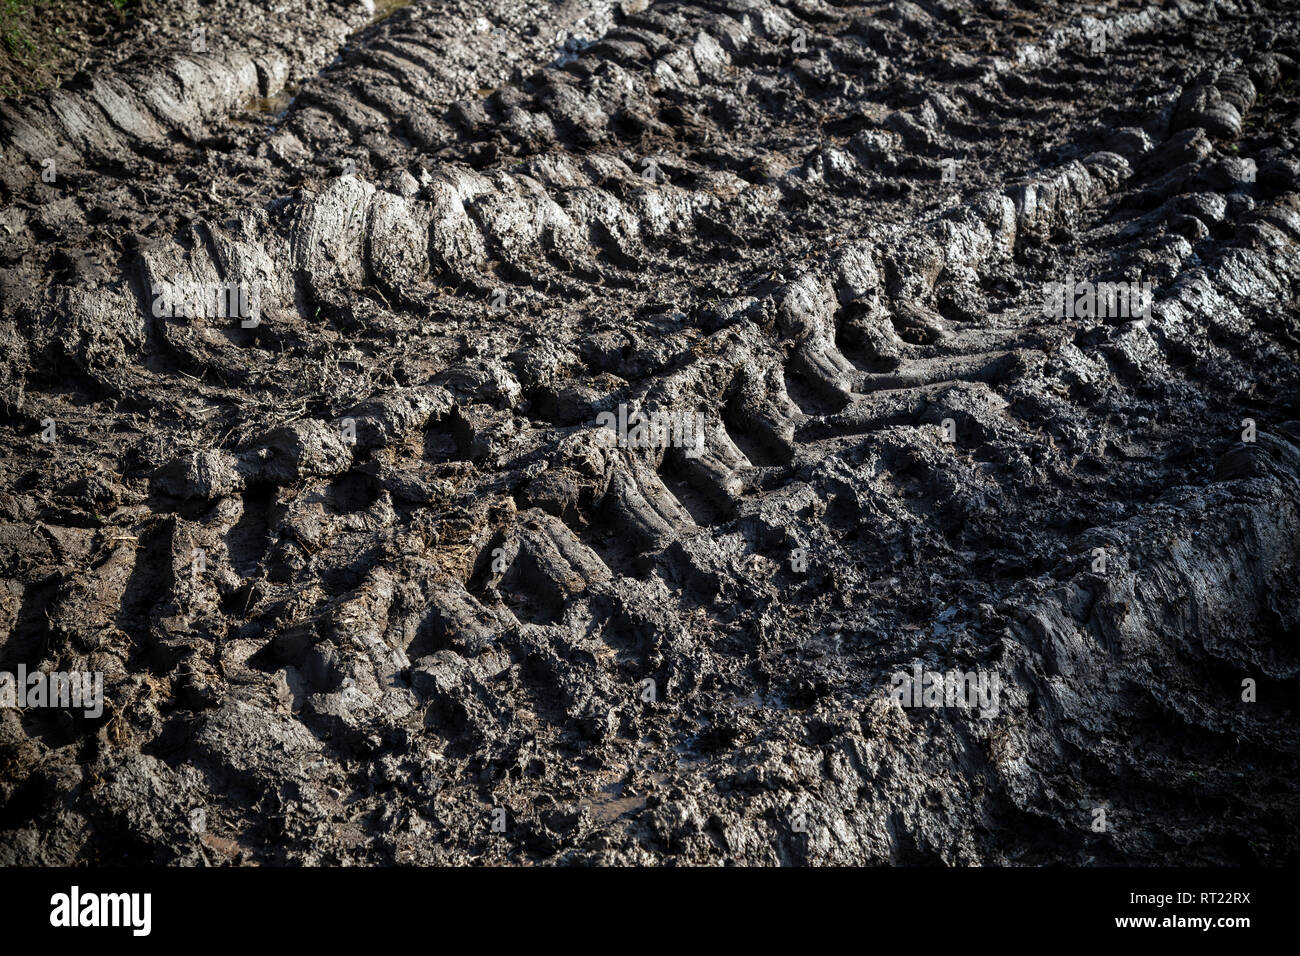 Abstract tyre tracks in Agricultural Field, Agriculture, Backgrounds, Car, Commercial Land Vehicle, Creativity, Curve, Design, Dirt, Dirt Road, Dirty, Stock Photo